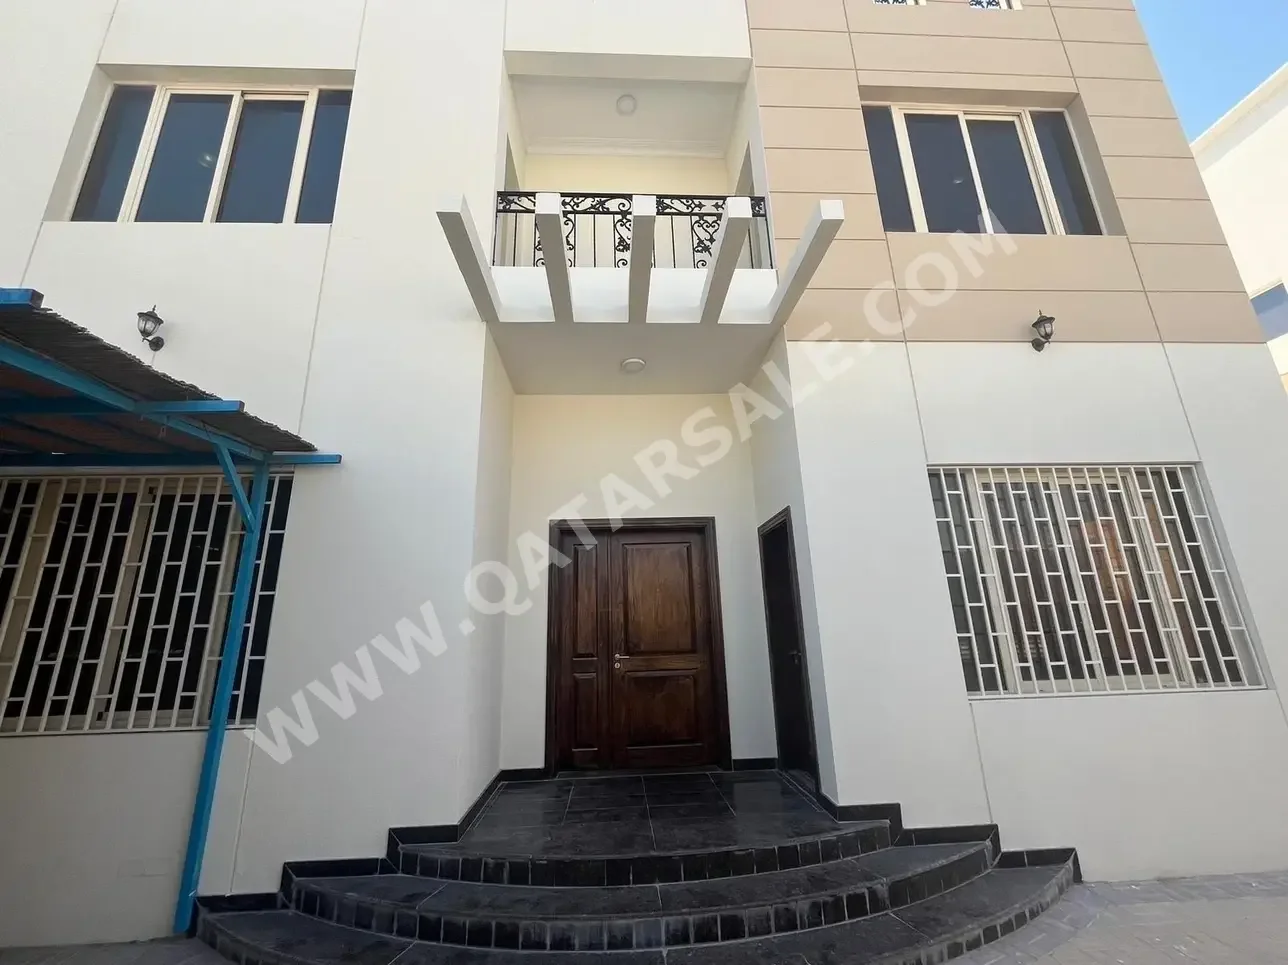 Labour Camp Family Residential  - Not Furnished  - Al Daayen  - Wadi Al Banat  - 5 Bedrooms